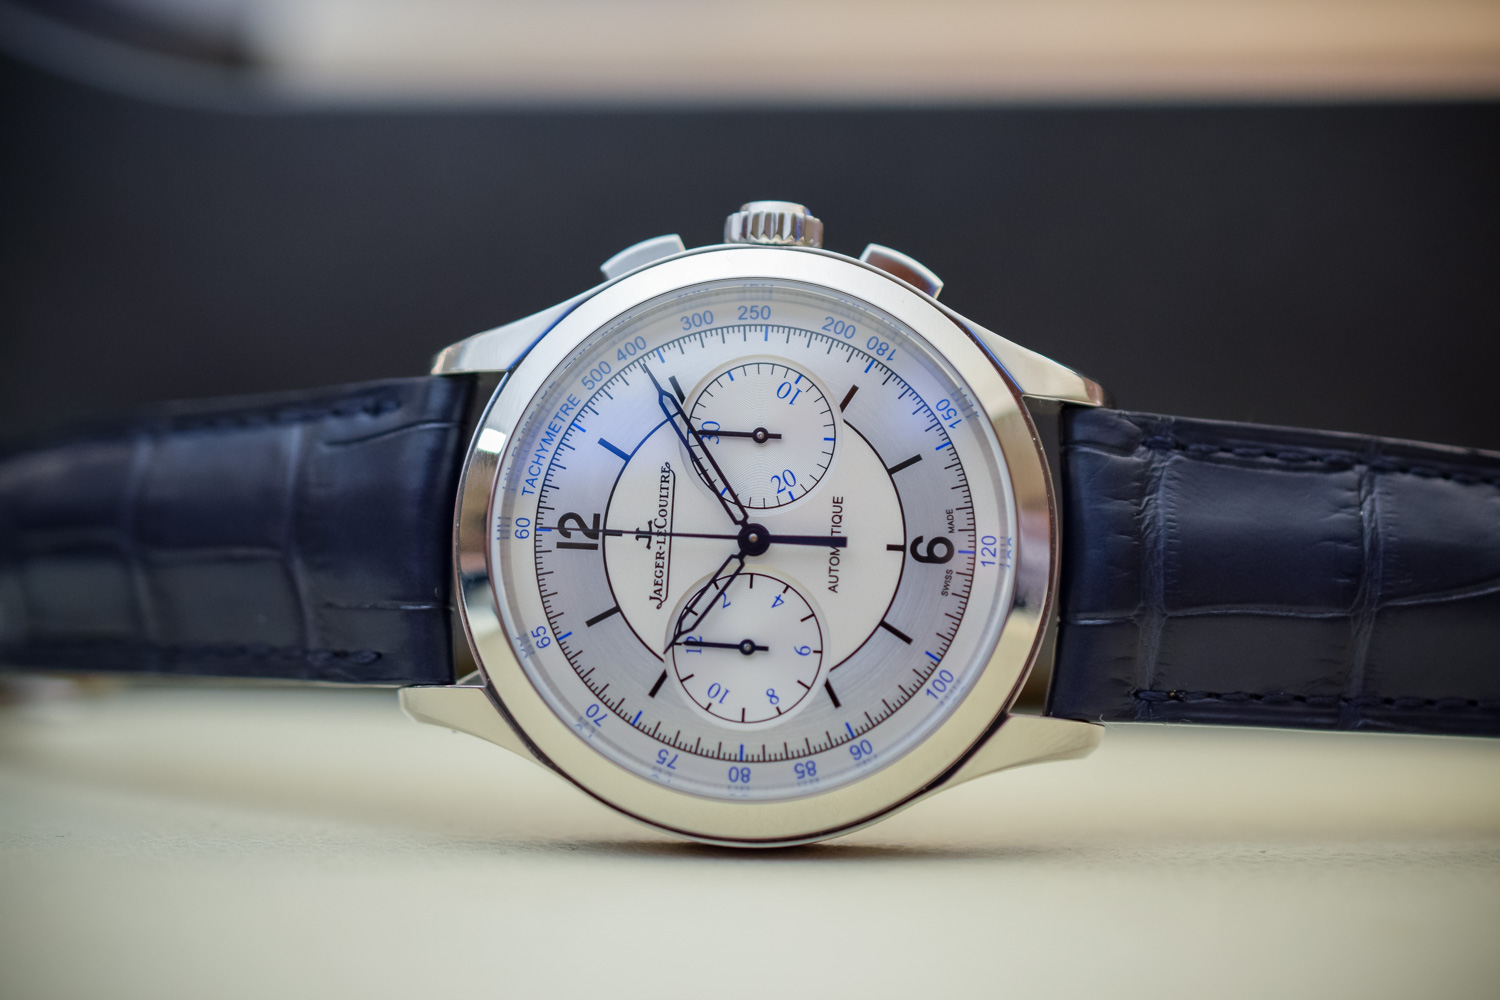 Jaeger-LeCoultre Master Chronograph Sector Dial